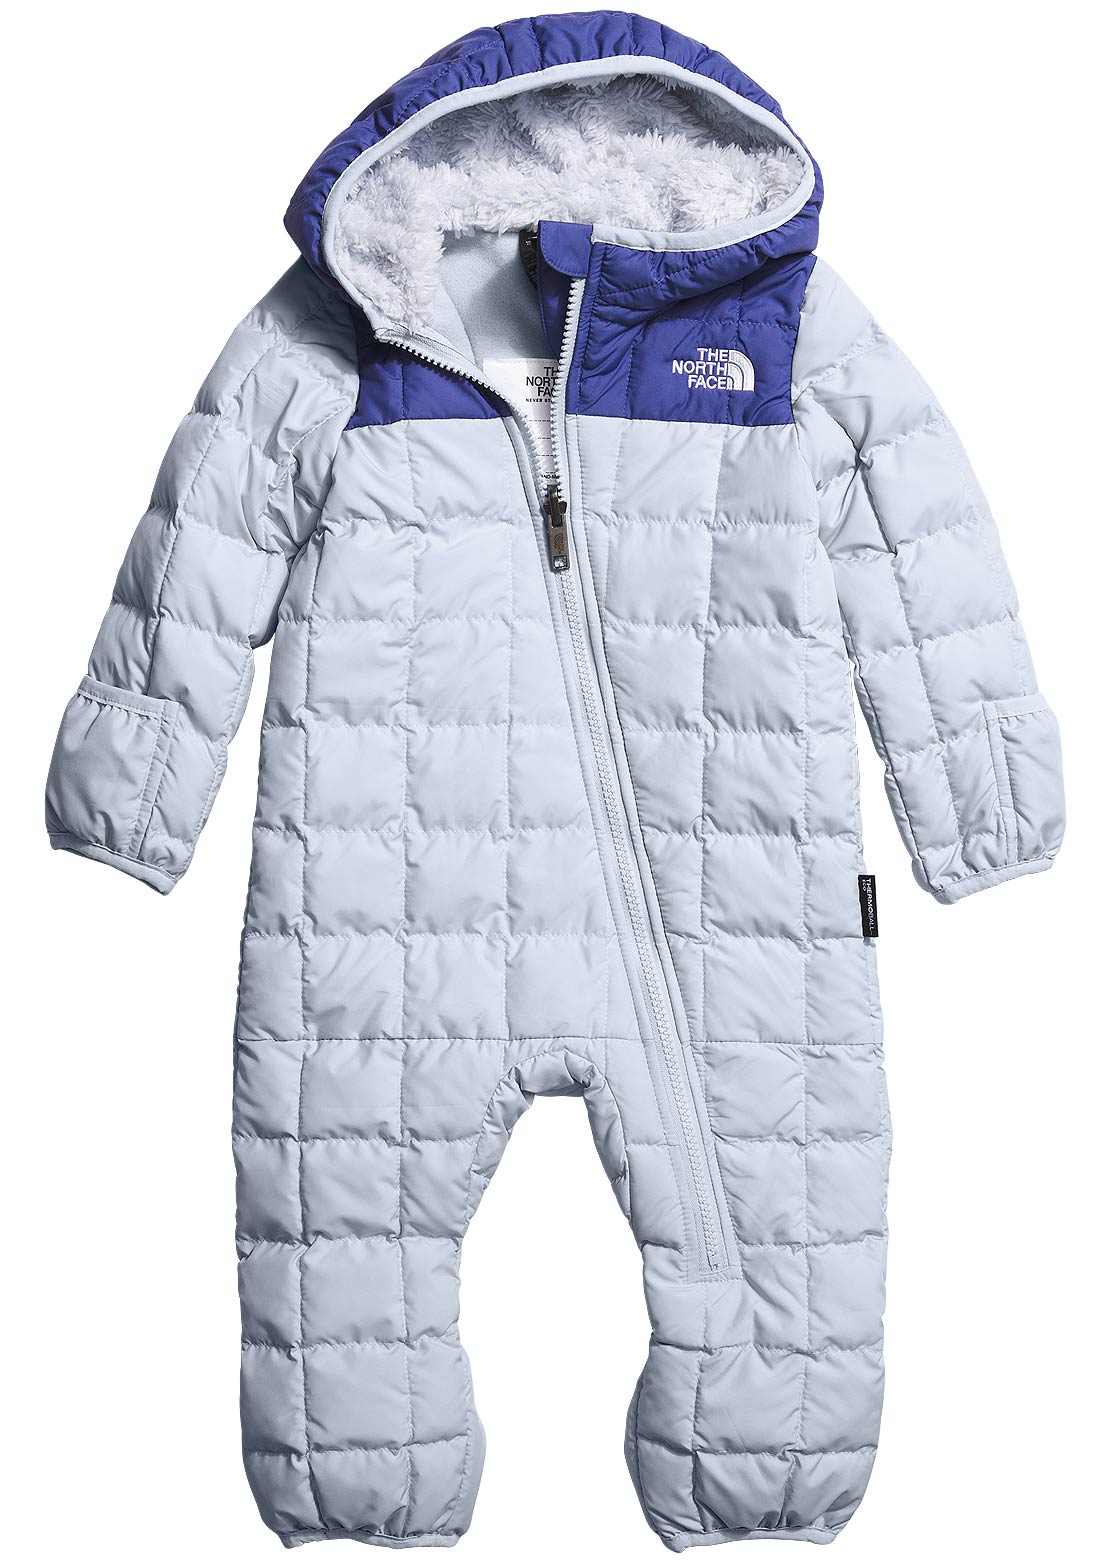  The North Face Infant ThermoBall One-Piece Dusty Periwinkle